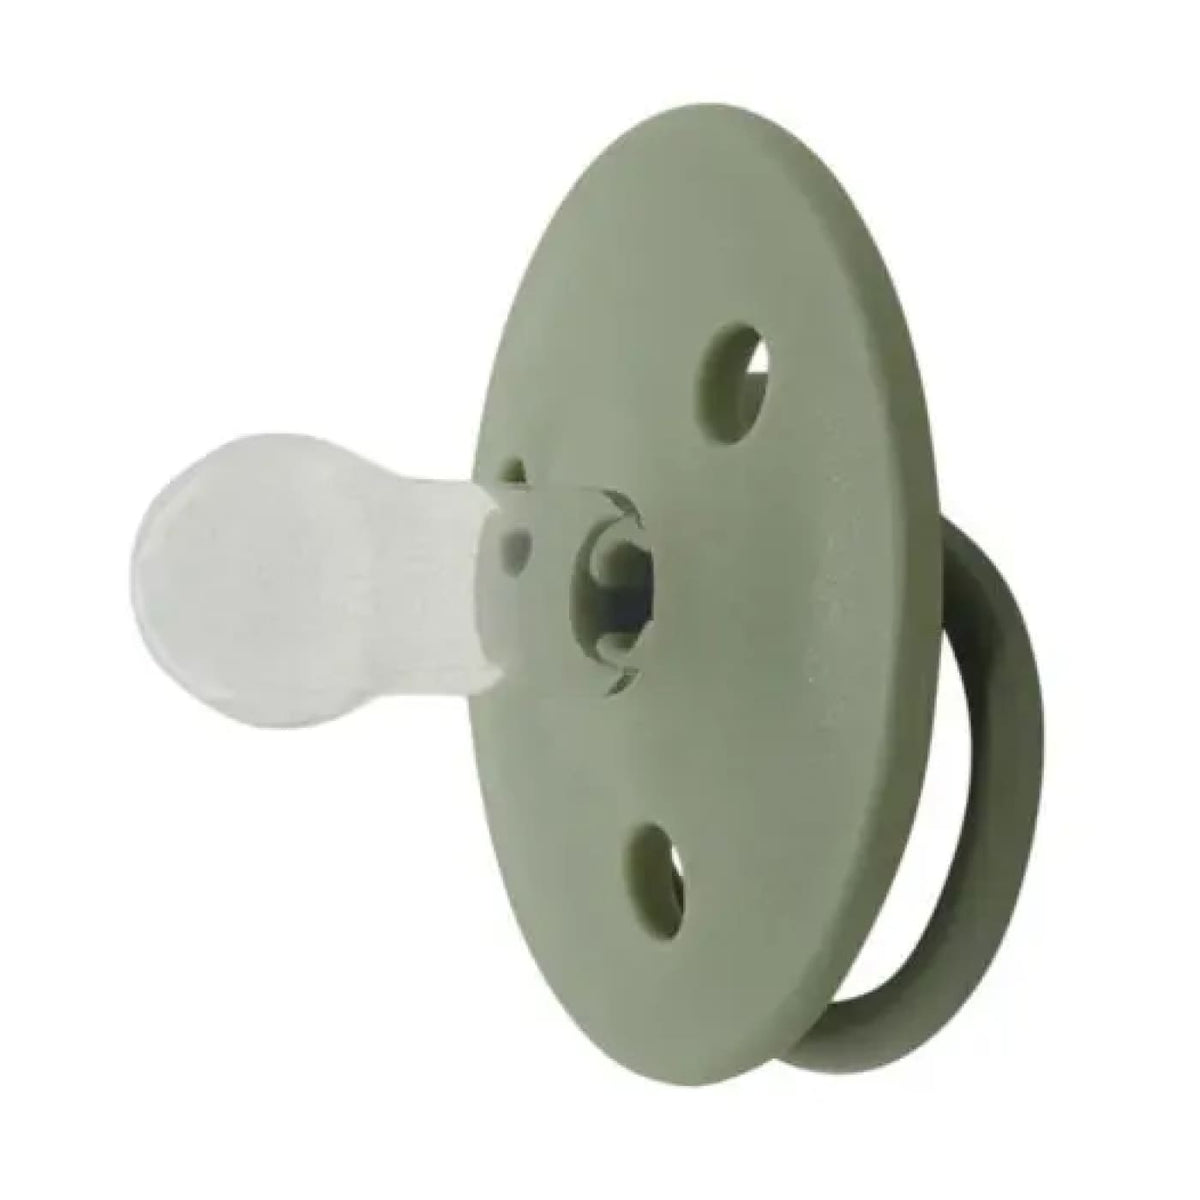 Mininor Silicone Pacifier/Dummy - Willow Green - NURSING &amp; FEEDING - DUMMIES/SOOTHERS